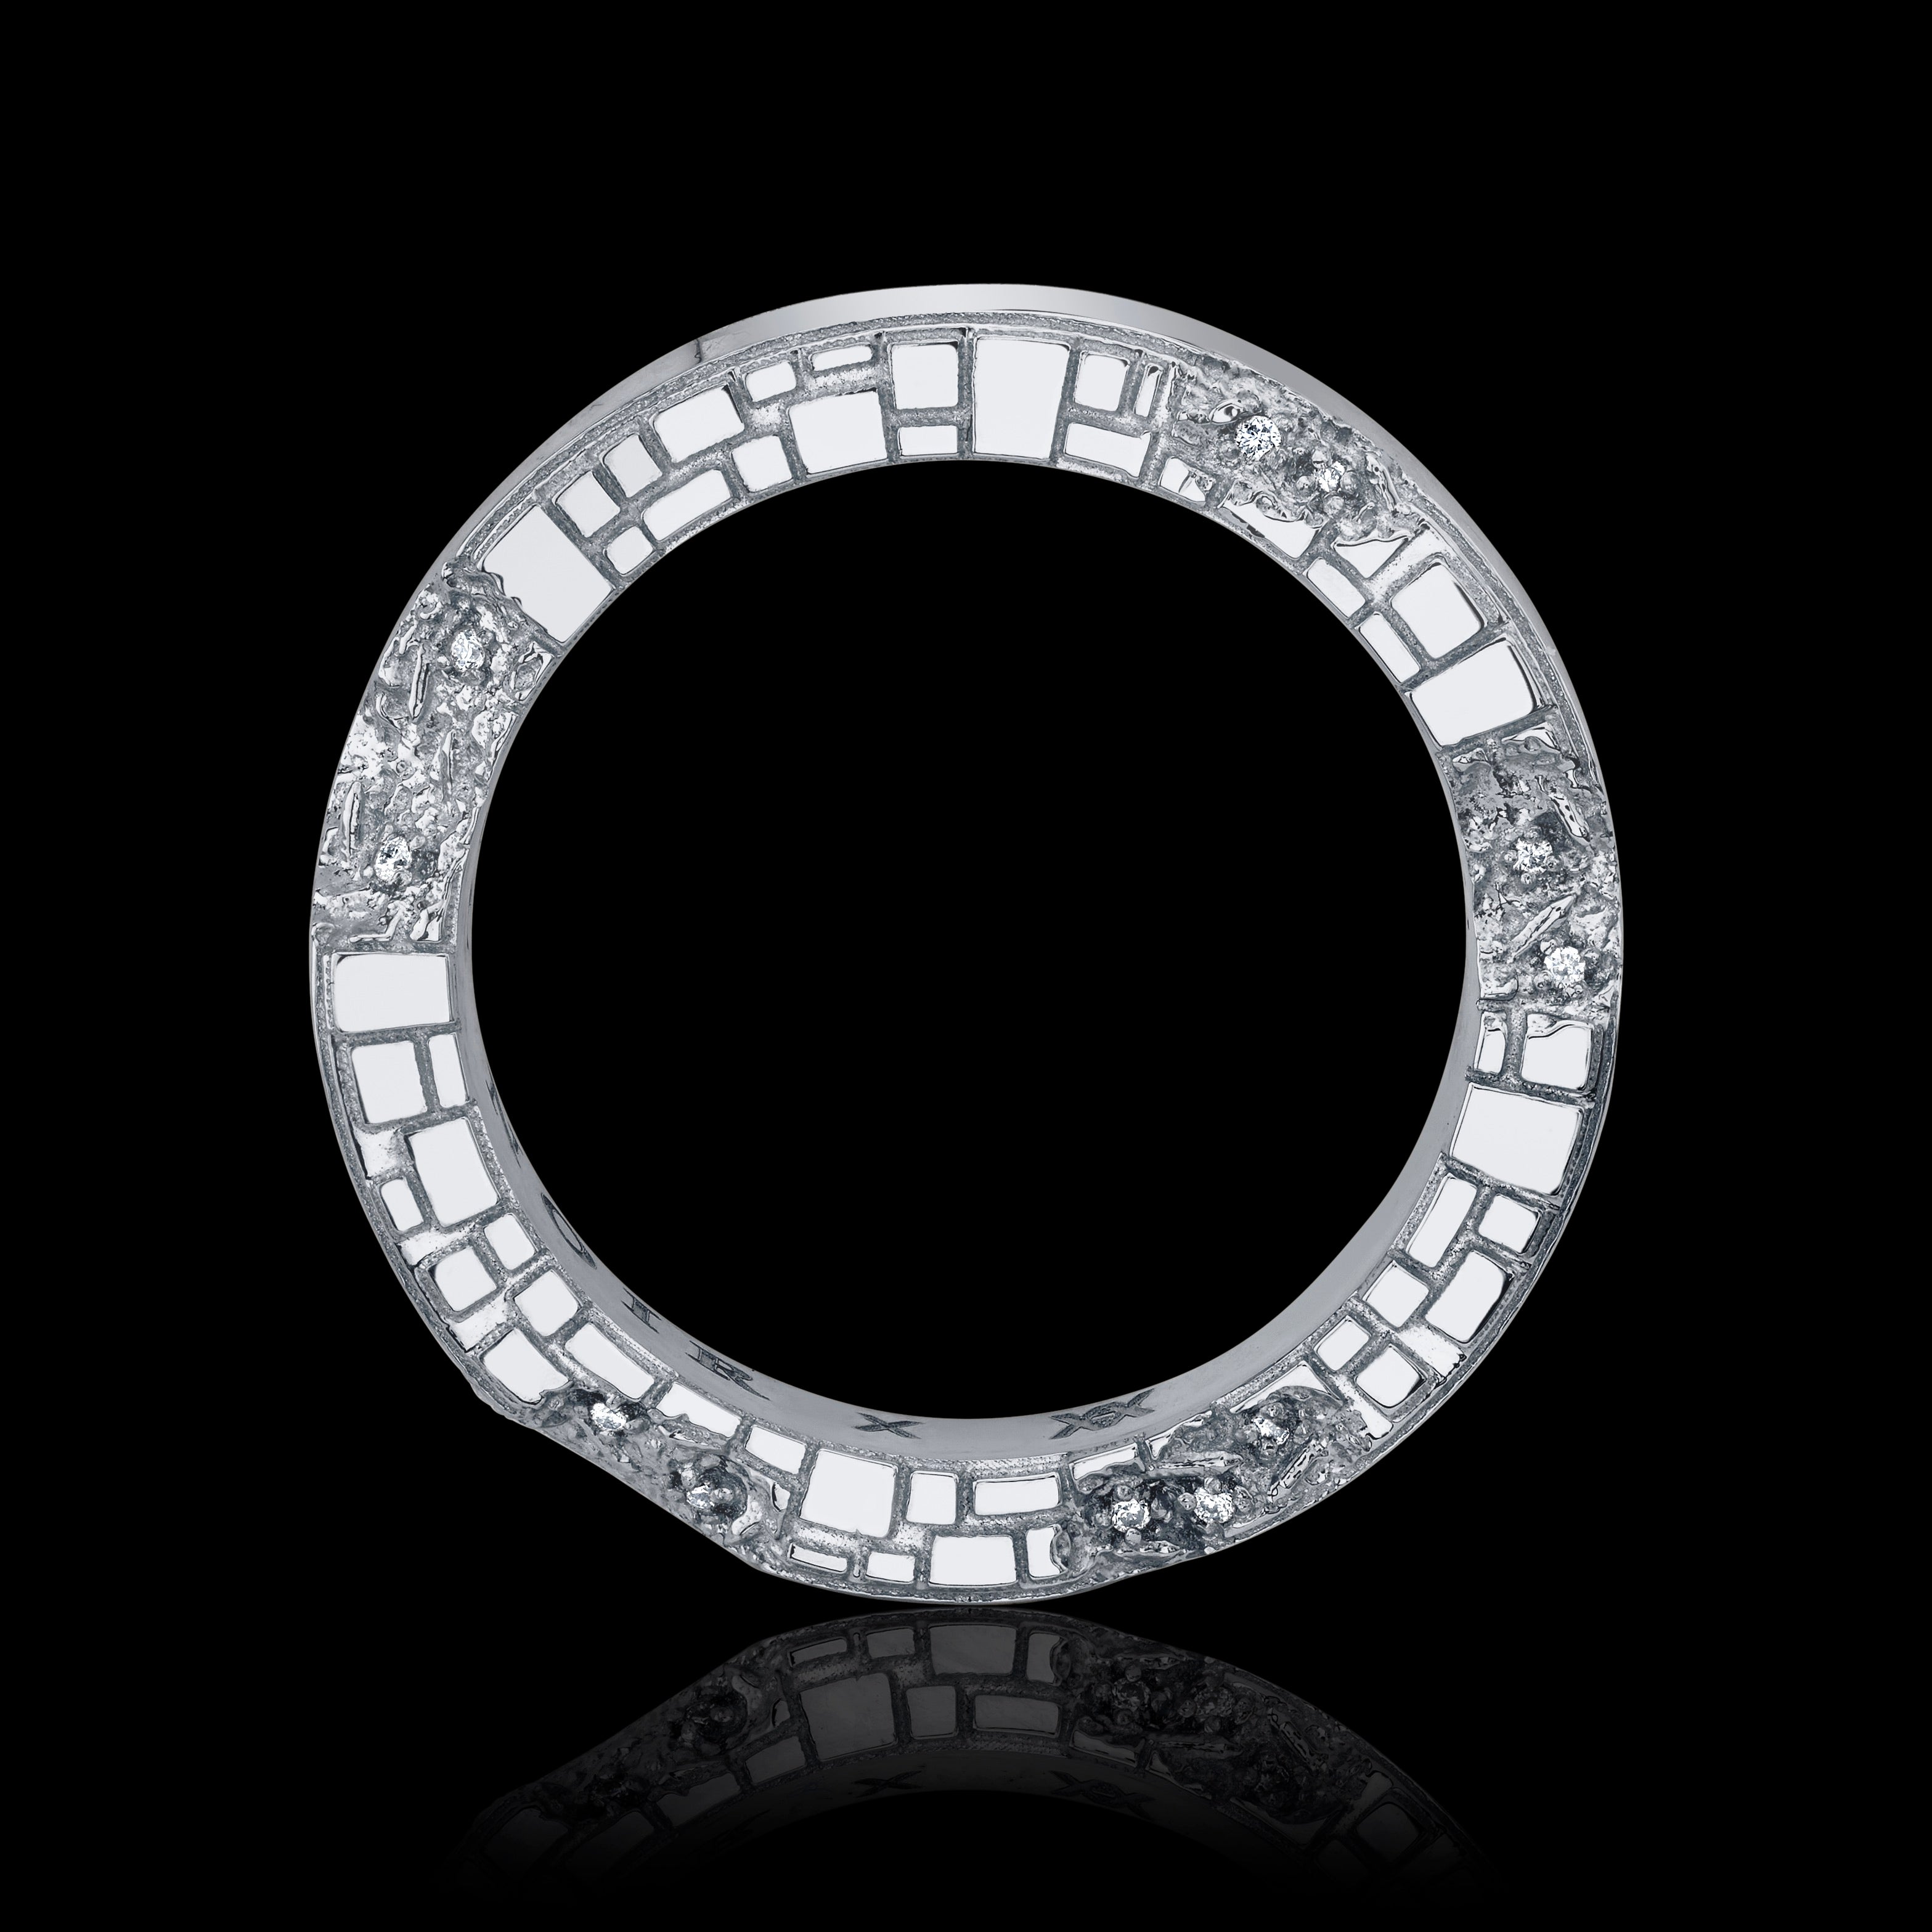 ’Eroded Architecture’ Ring in solid 18k white gold • Edition of 50